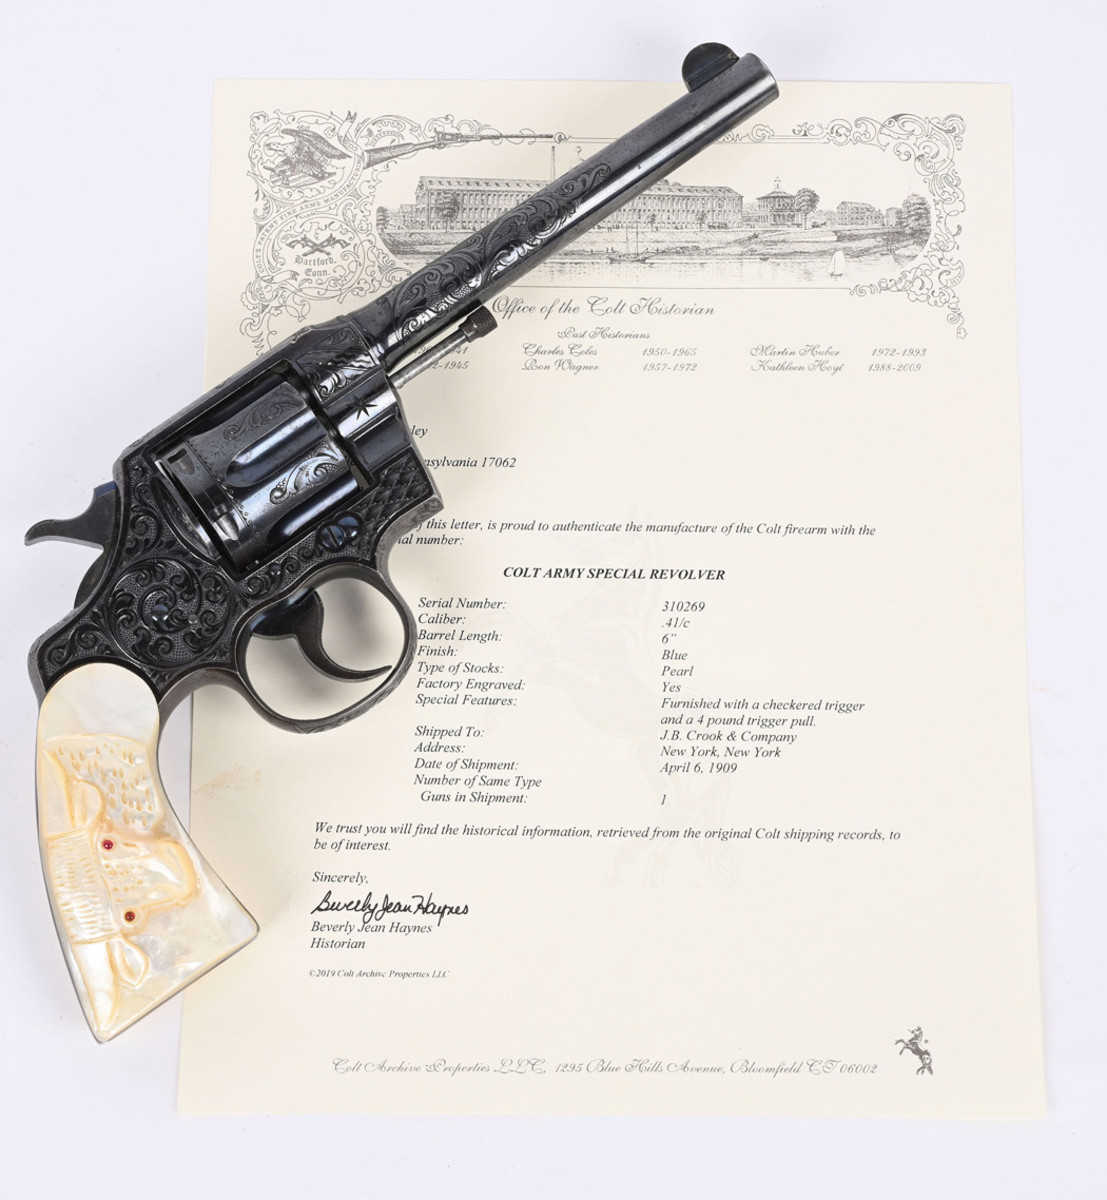 Pearl-handled Colt .41-caliber Army Special Revolver sent in 1909 as a shipment of one to J.B. Crook & Co., New York, with engraving by Cuno Helfricht’s shop that includes a carved steer’s head with ruby eyes on right side of grip. Special features: checkered trigger, 4lb. trigger pull.